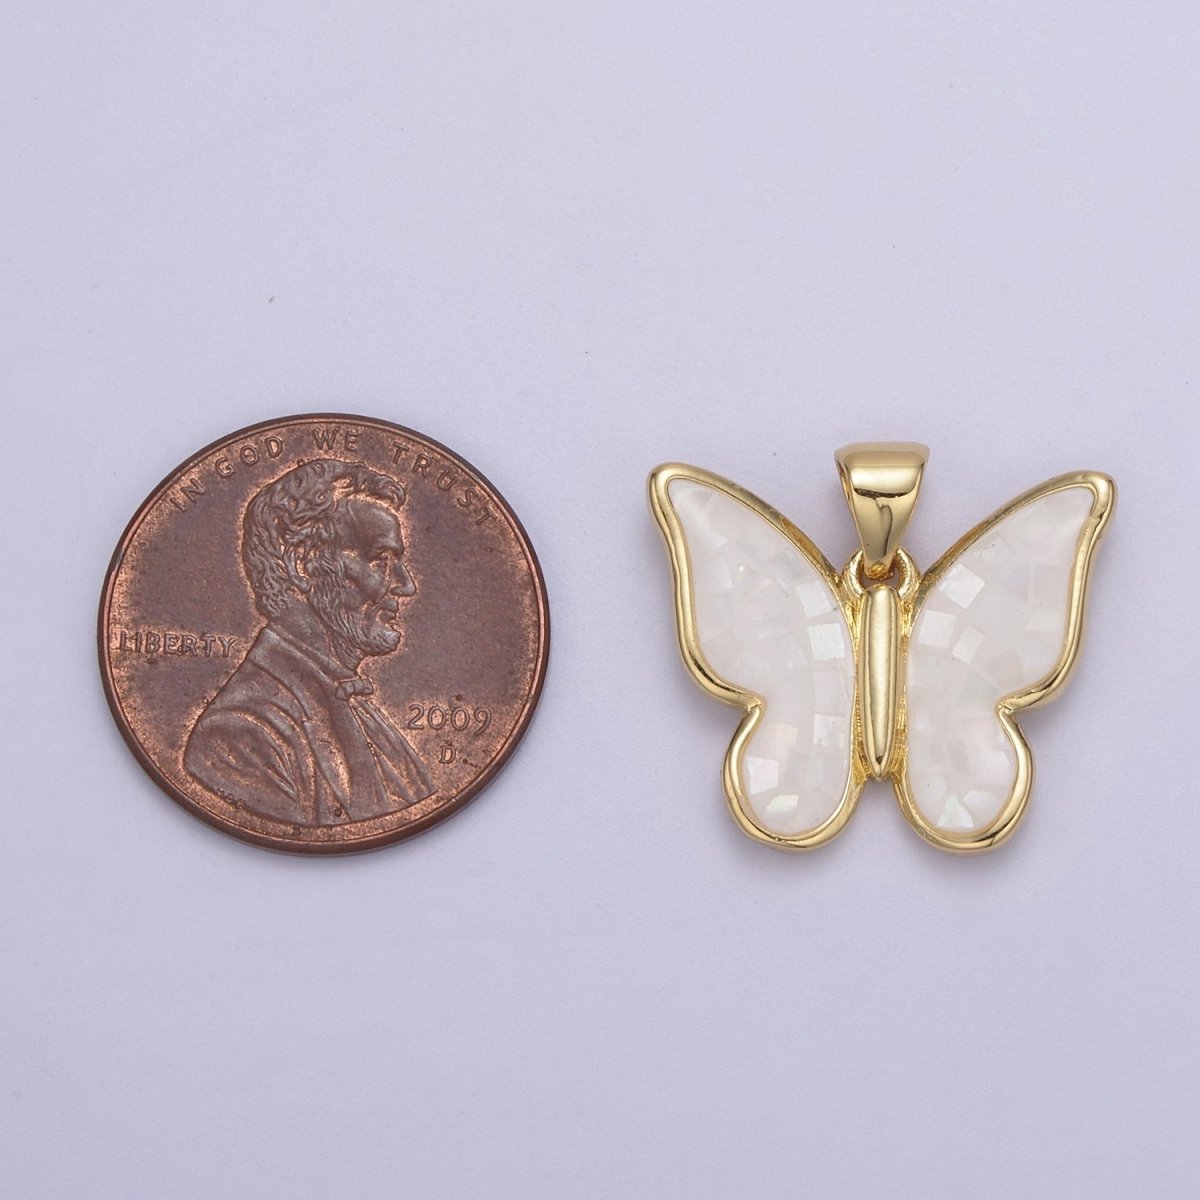 White / Pink / Blue / Green Opal Mariposa Butterfly Charm for Necklace, Dainty Butterfly Pendant for Jewelry Making Supply in Gold Filled H-583 H-587 H-589 H-596 - DLUXCA